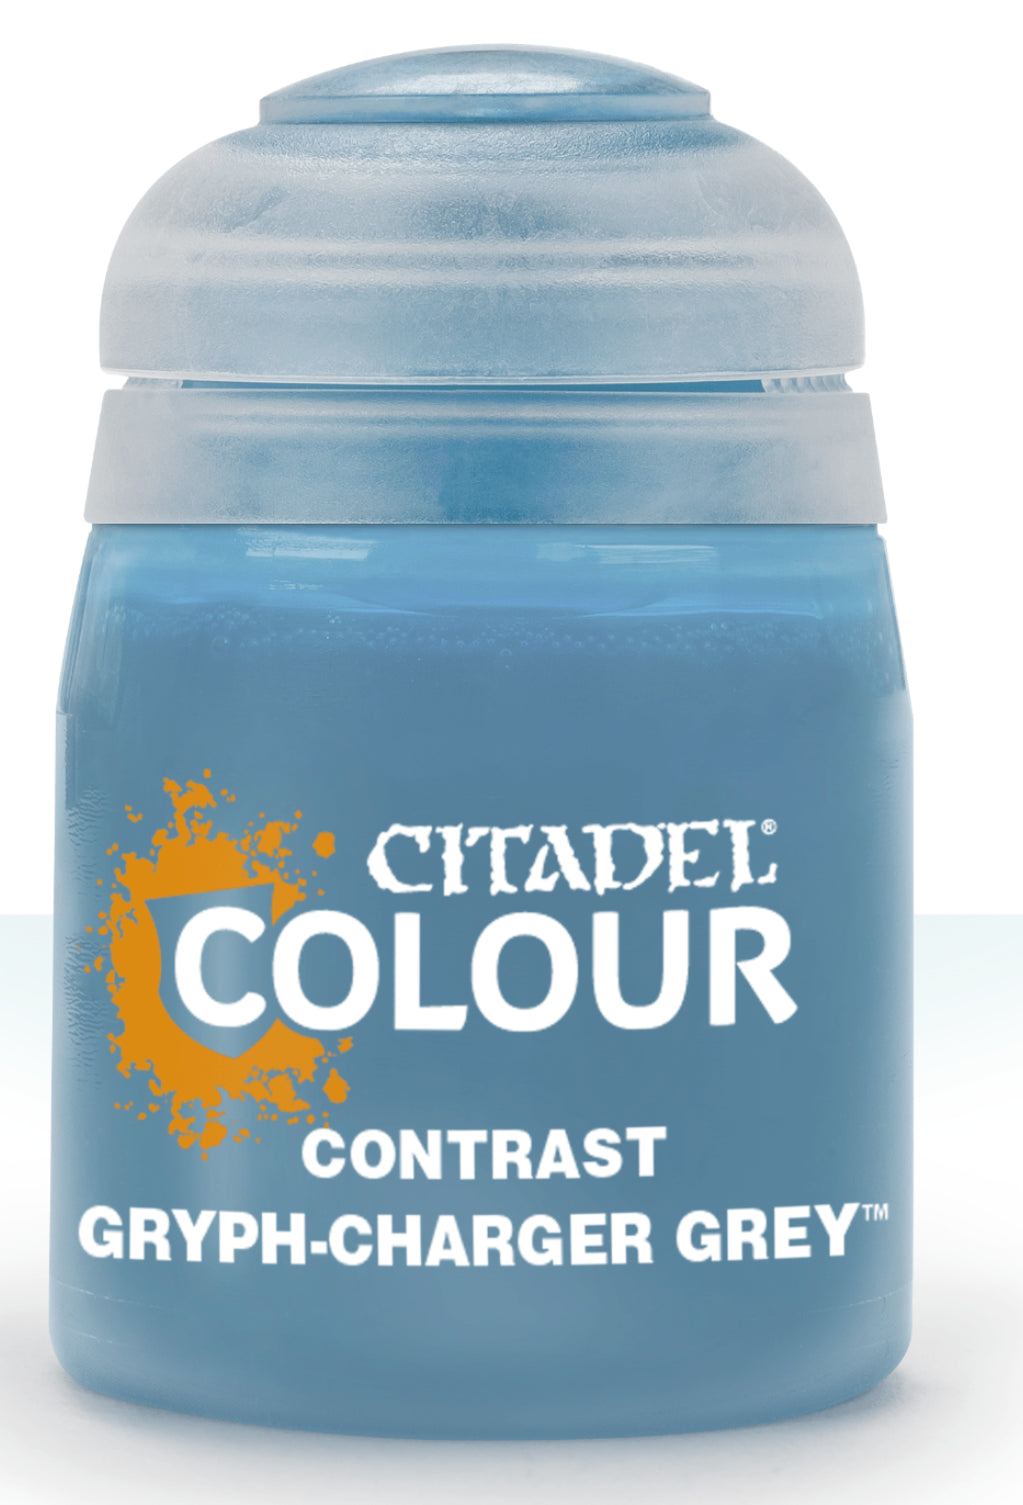 Gryph-Charger Grey Citadel Paints - Contrast - 18ml